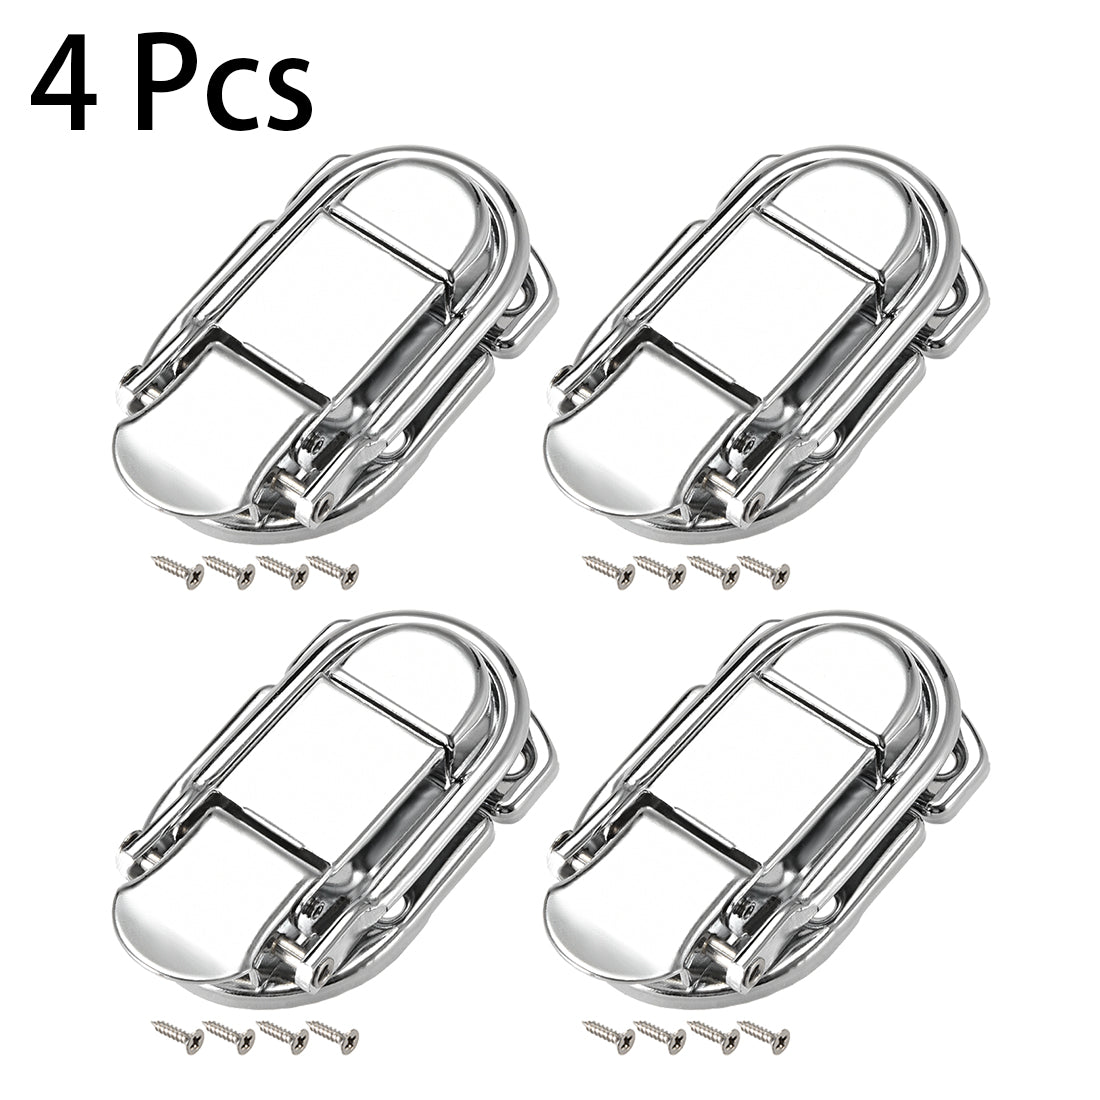 uxcell Uxcell 60mm x 33mm Metal Small Size Suitcase Hasp Catch Latch with Screws 4 Pcs